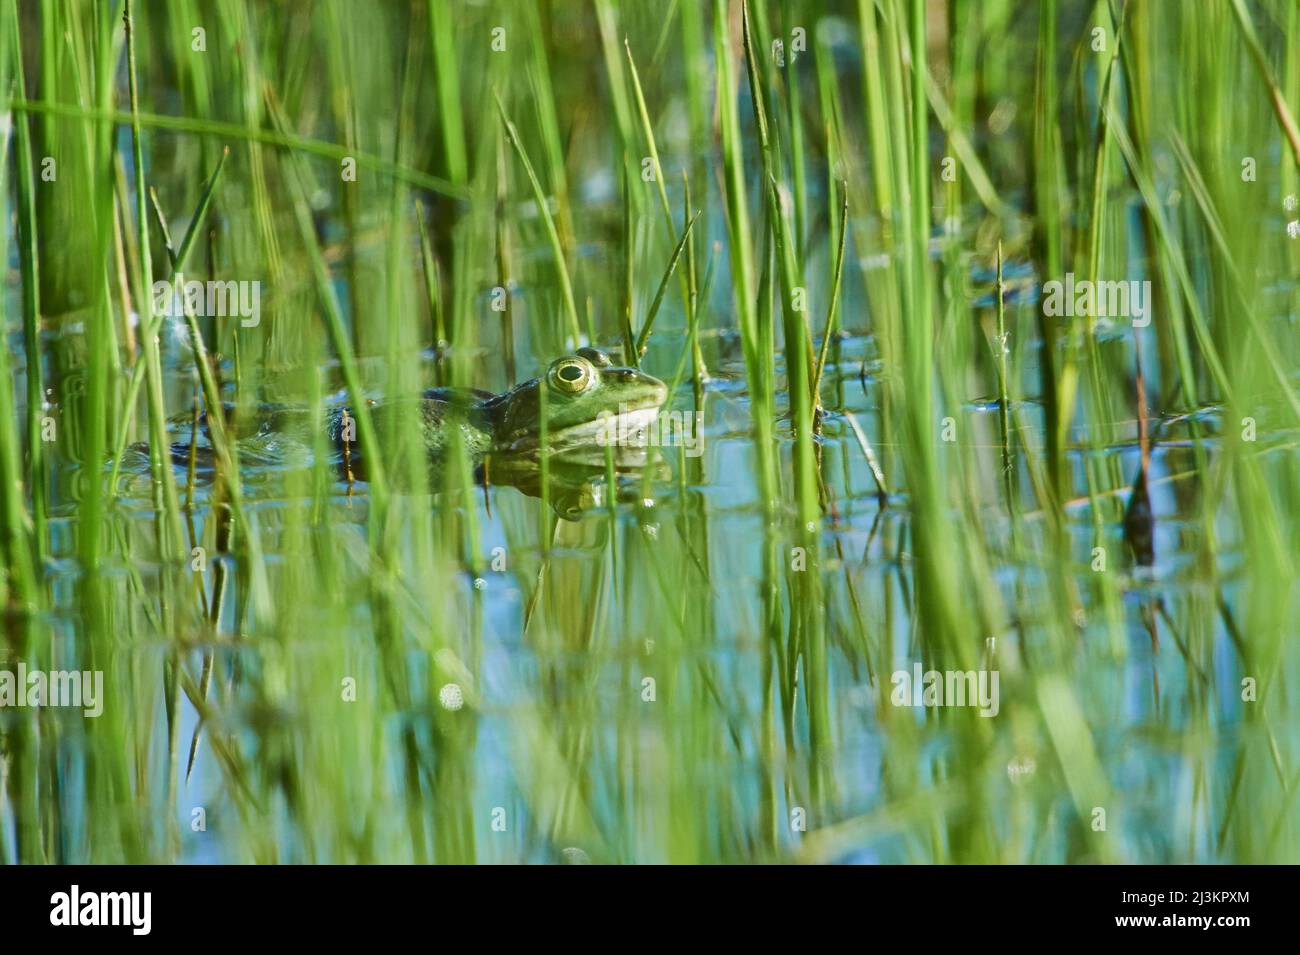 Hidden Little Pond Frog Photos and Images